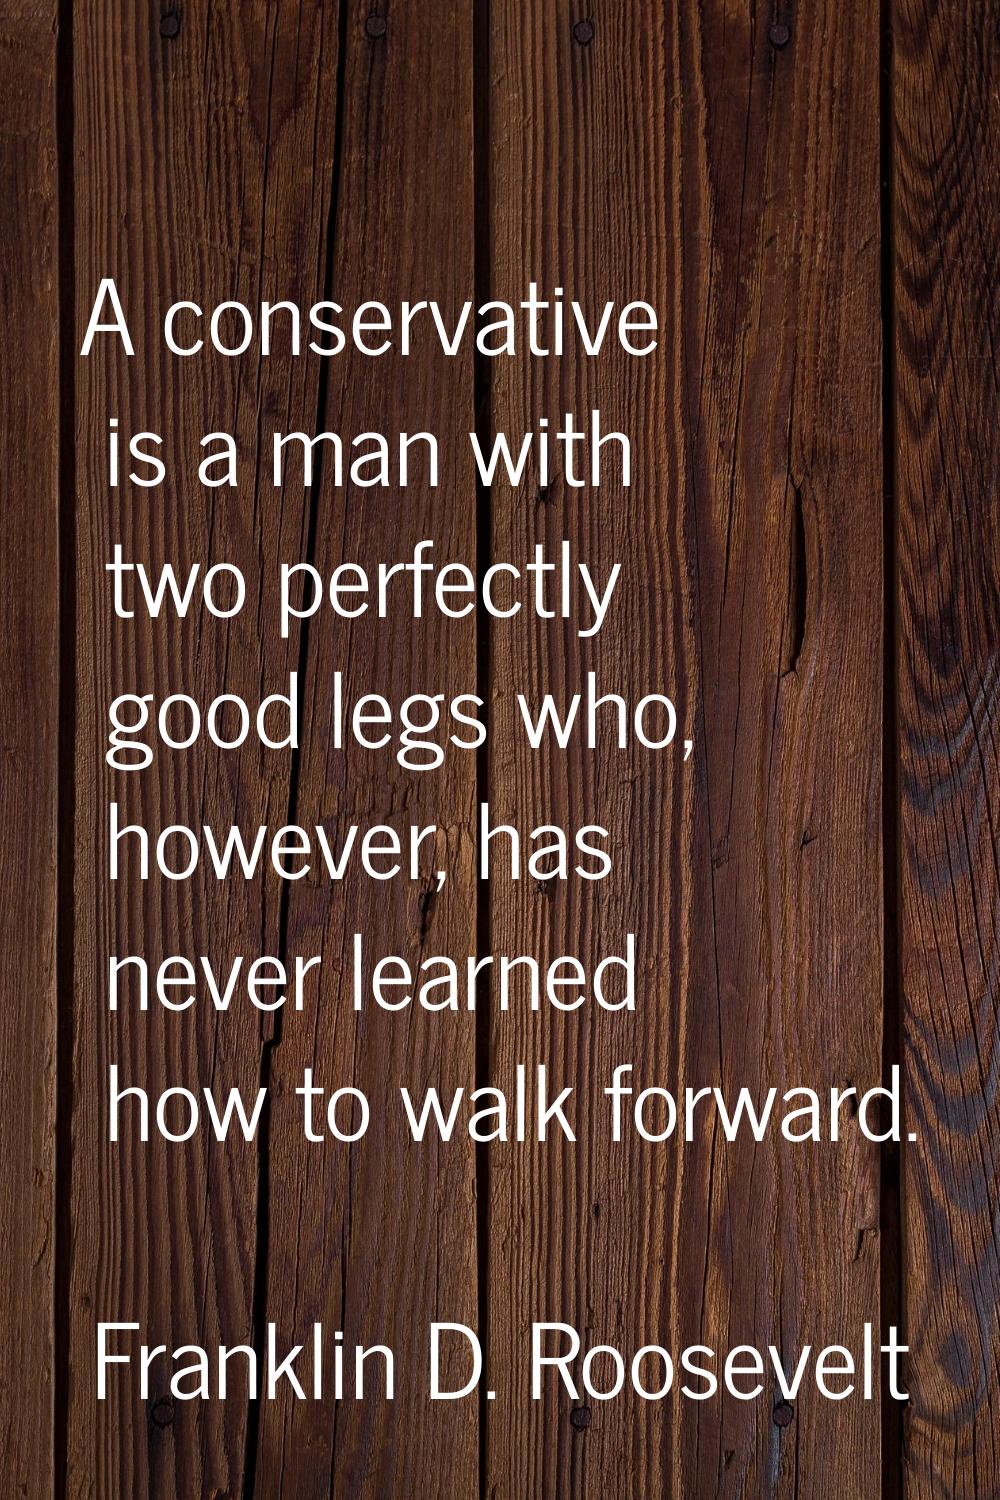 A conservative is a man with two perfectly good legs who, however, has never learned how to walk fo